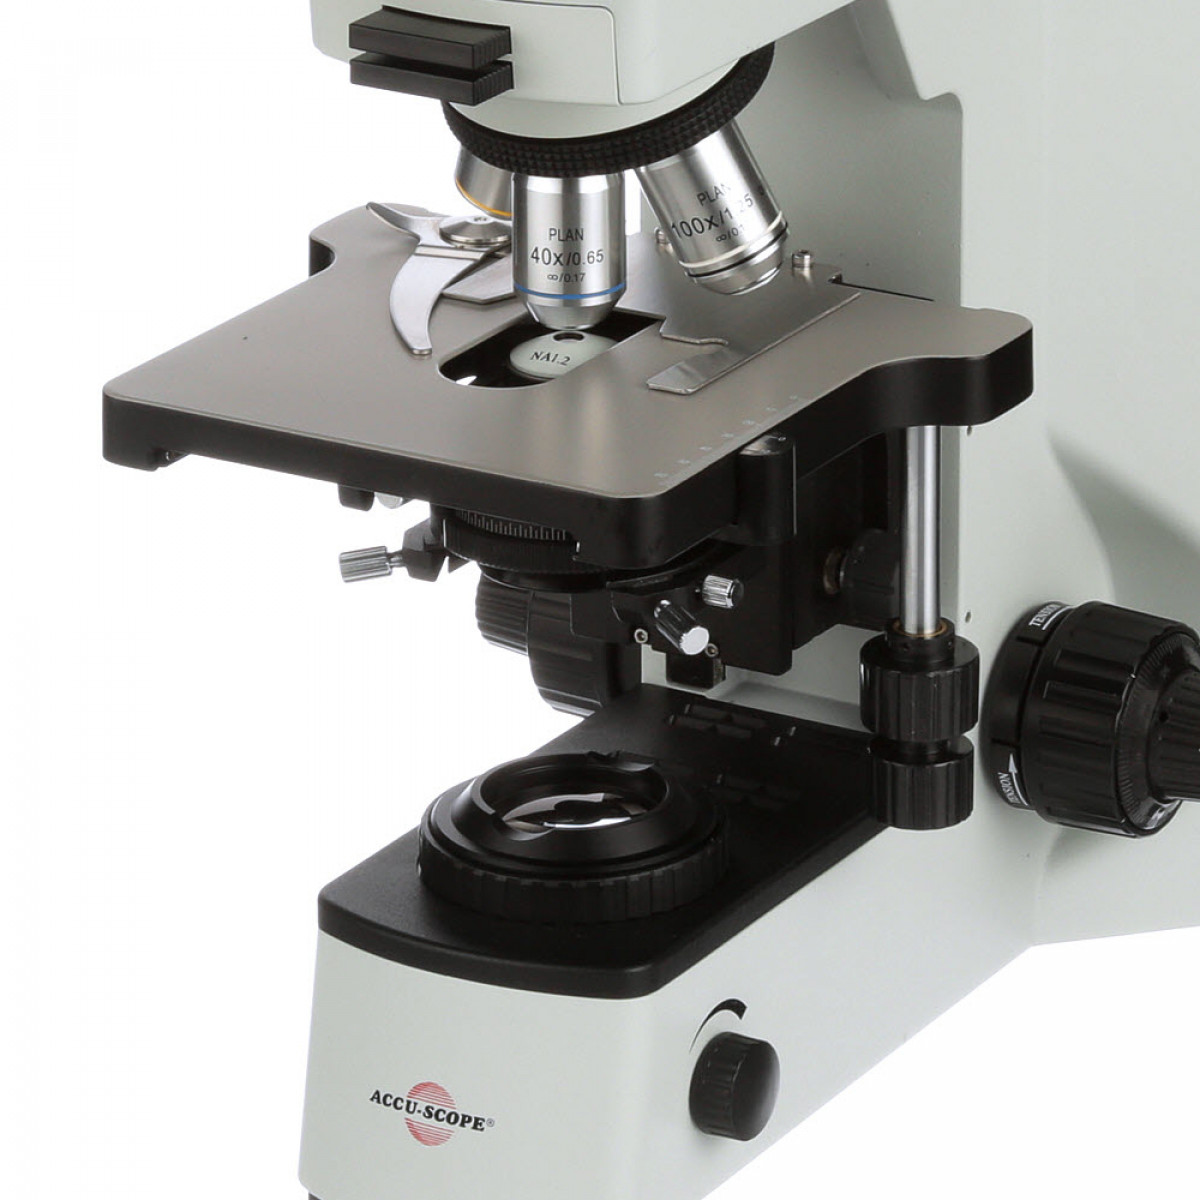 Ceramic stage shown installed on EXC-400 microscope (microscope not included)